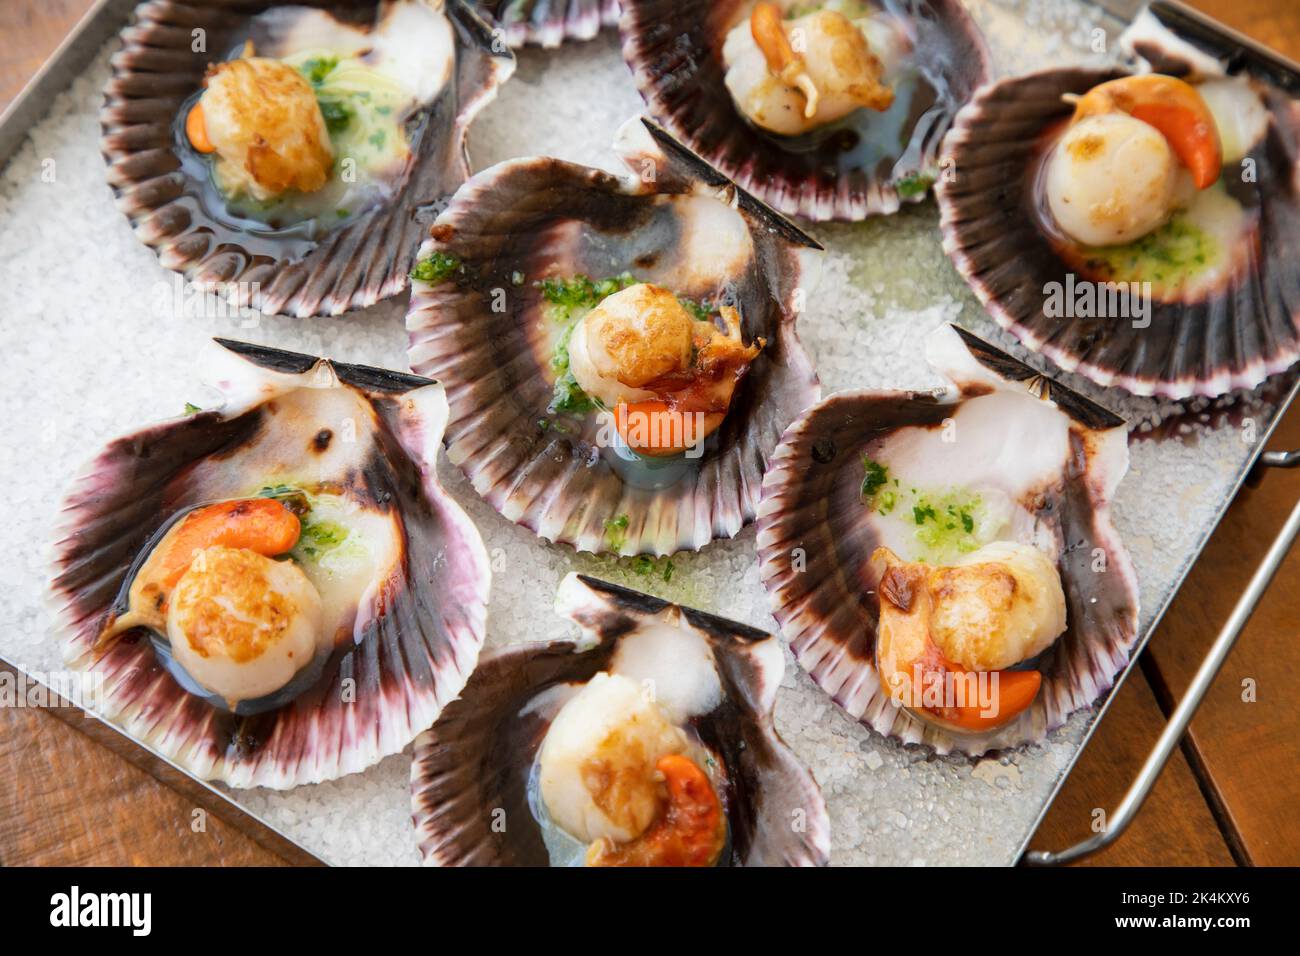 Scallops tapas, with garlic and parsley butter Stock Photo